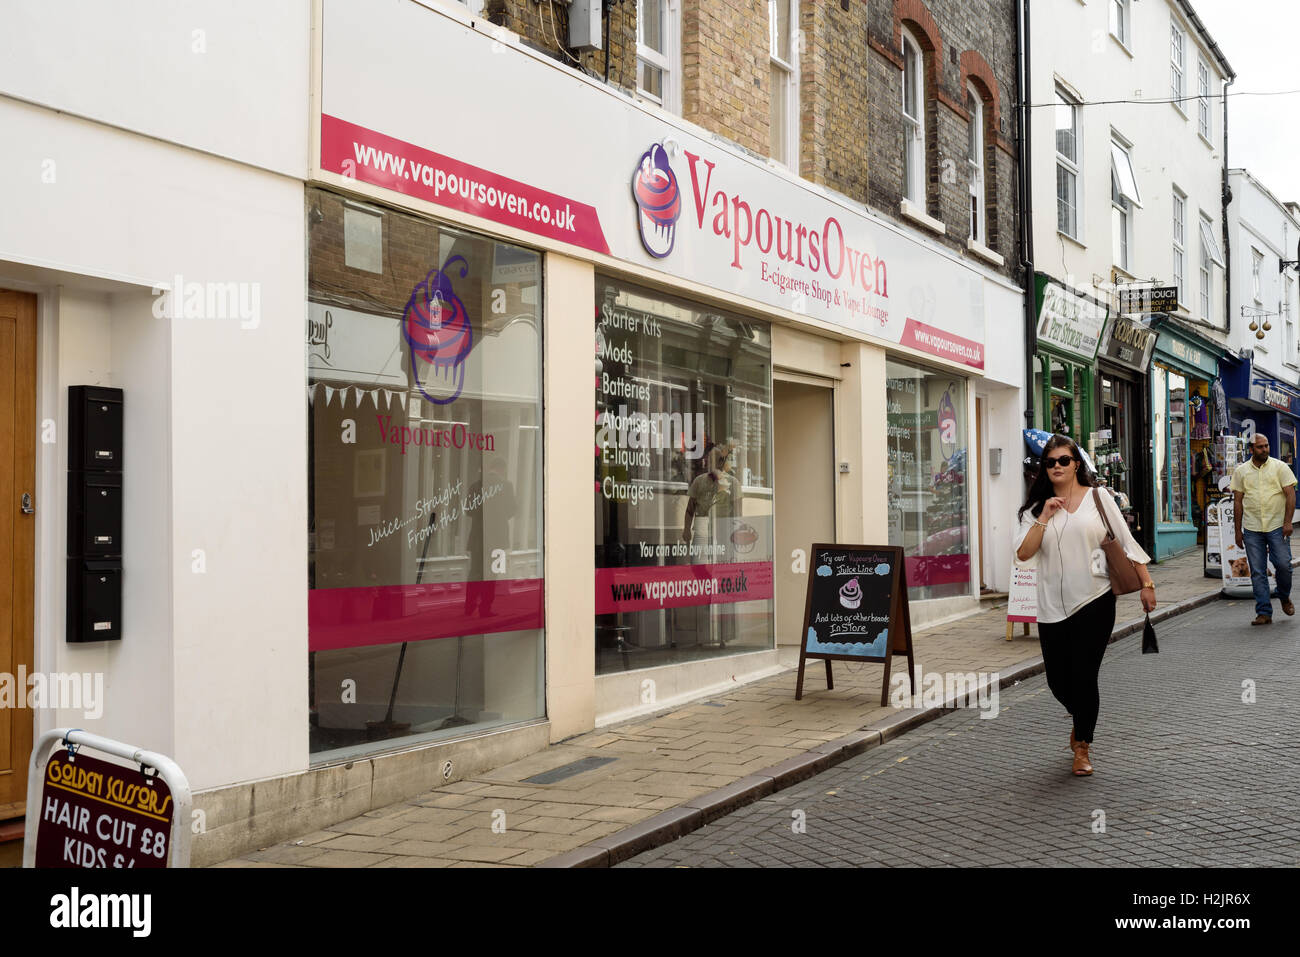 Vapours Oven is a popular E-Cigarette Shop and Vape Lounge for smokers based in Colchester Essex England Stock Photo